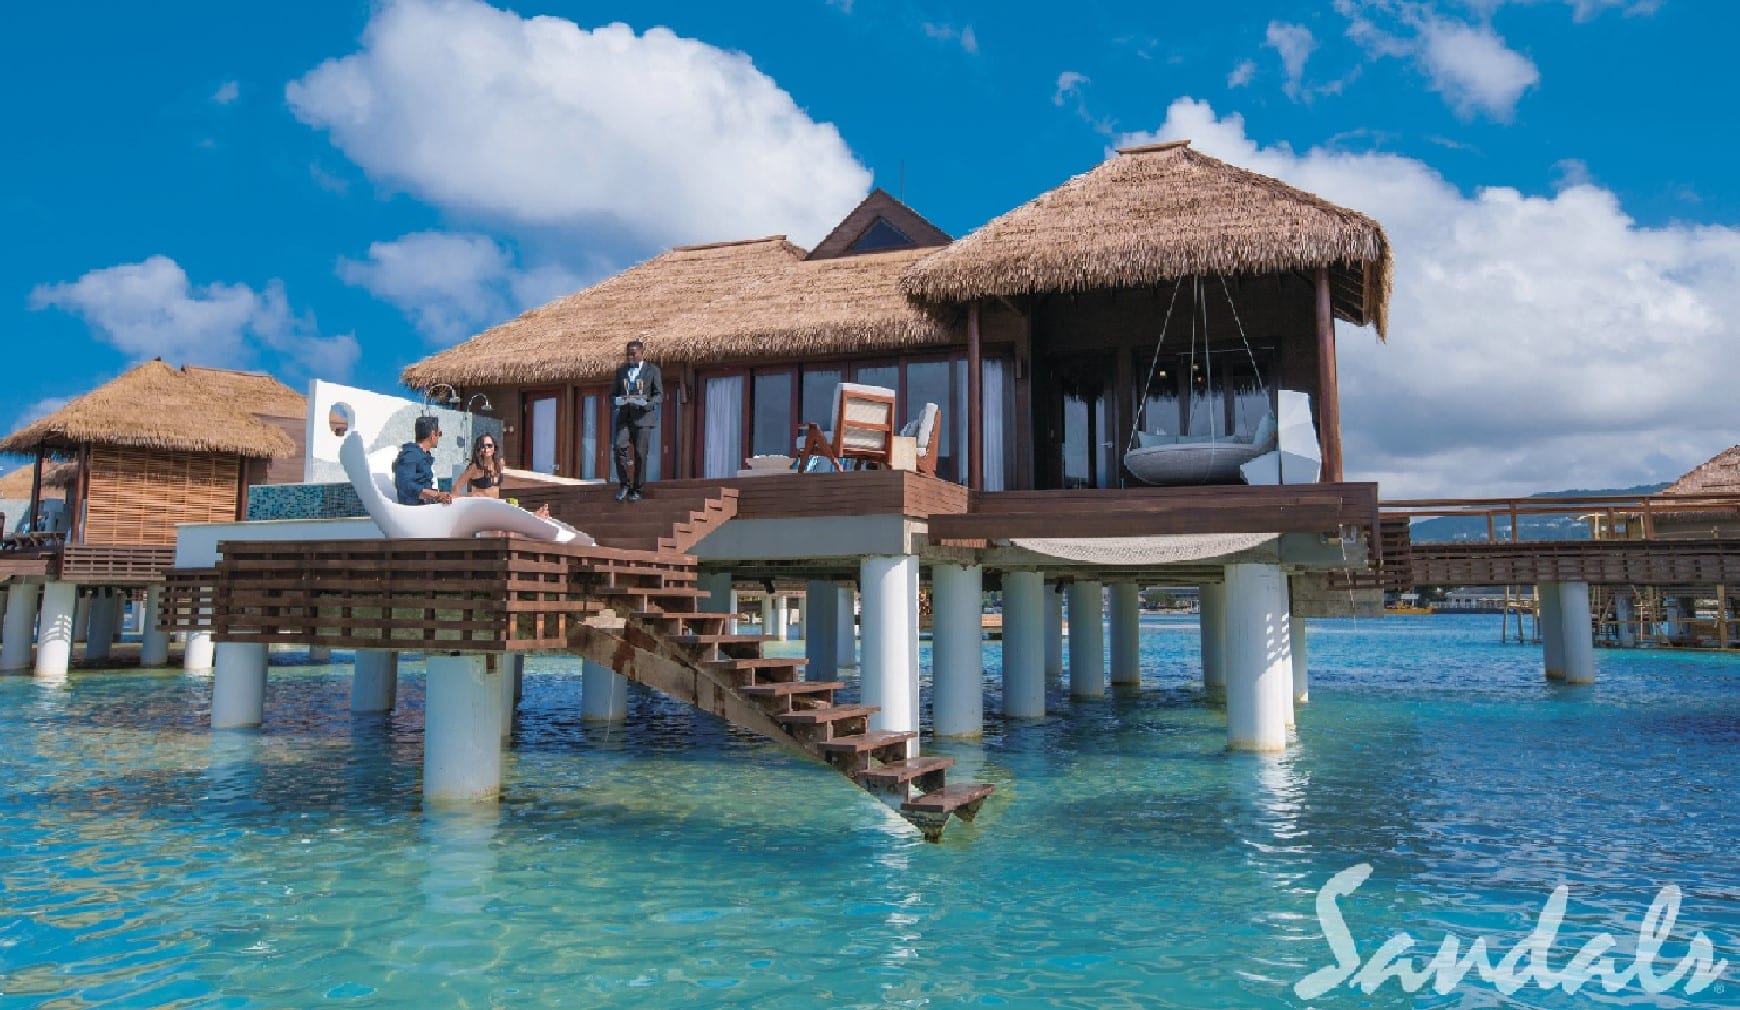 Over the Water Bungalow Suites in the Caribbean | Honeymoons Inc